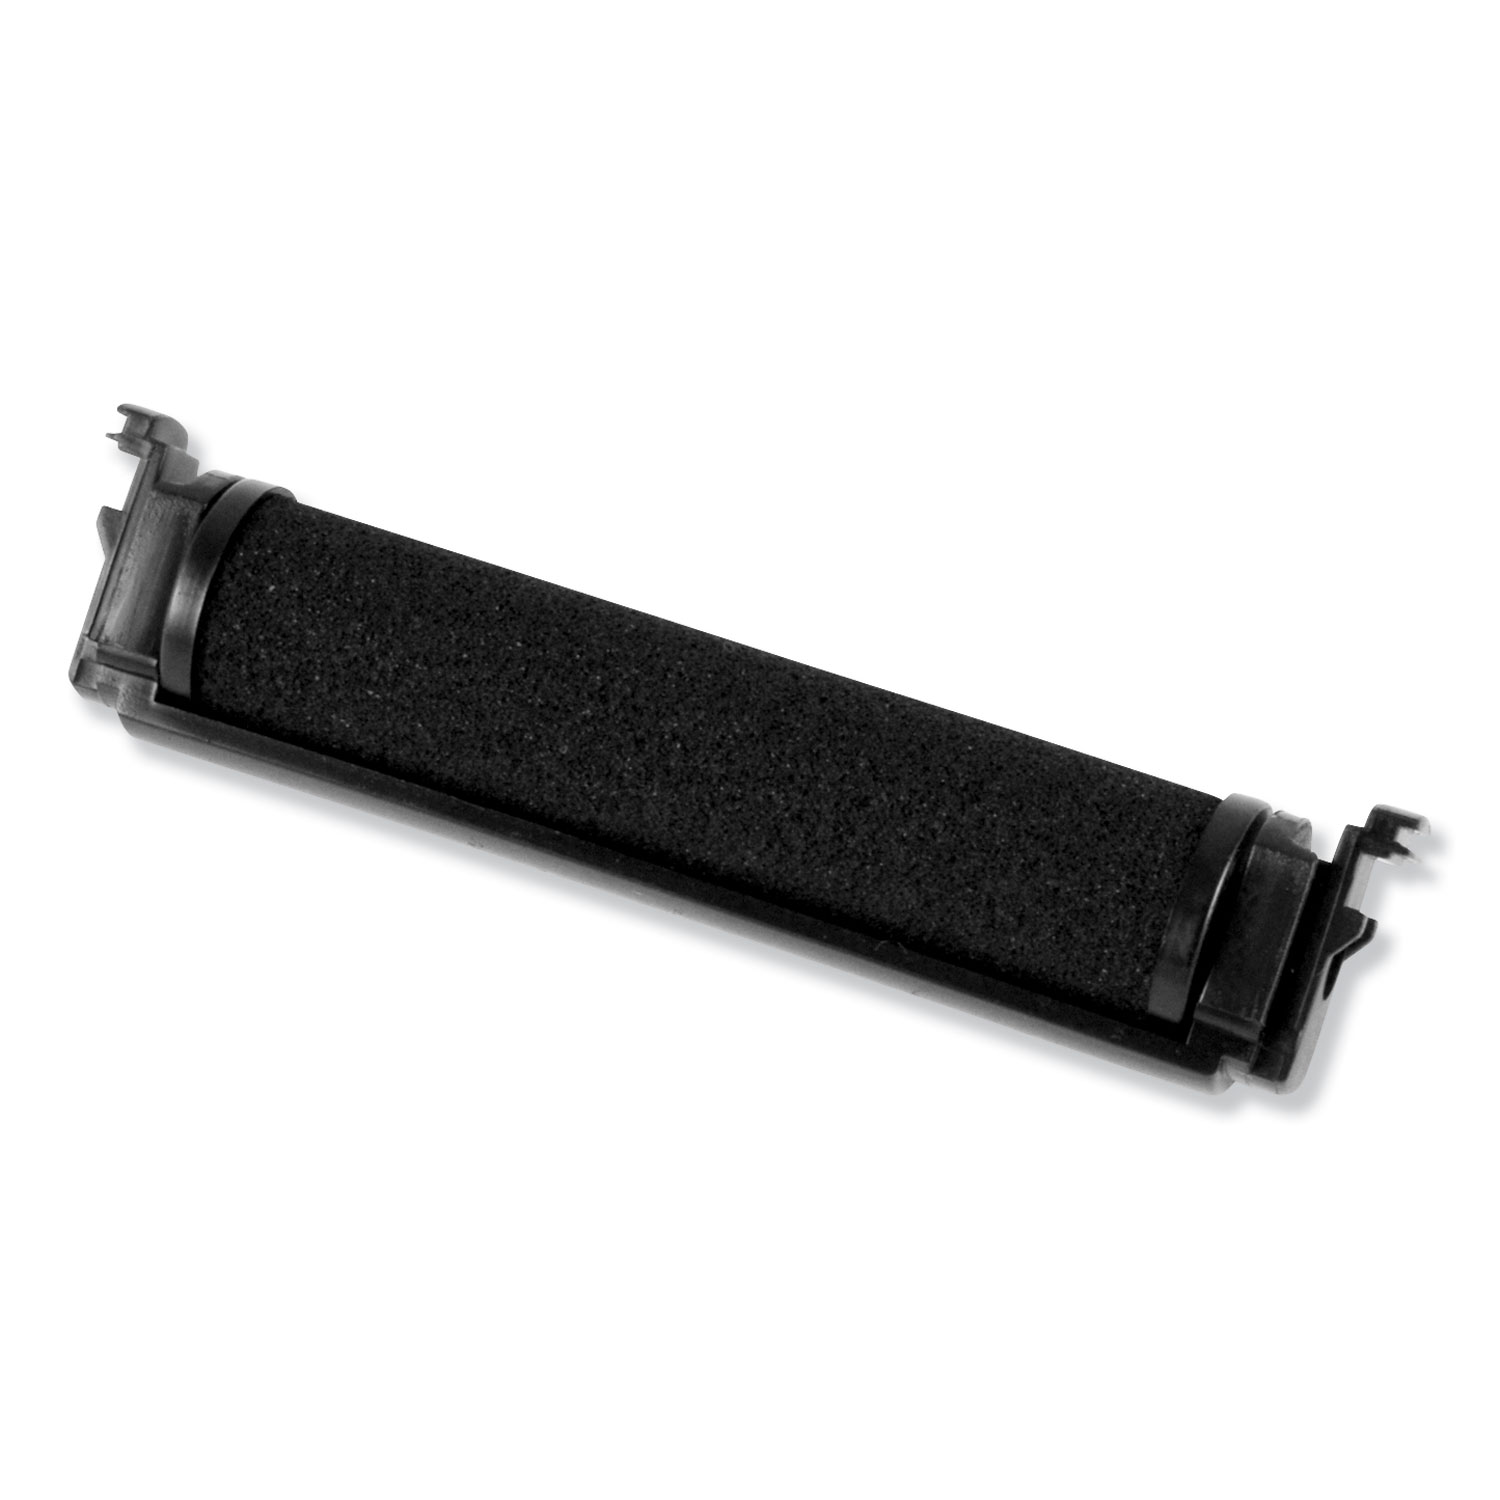  COSCO 2000PLUS 011096 Replacement Ink Roller for 2000PLUS ES 011091 Line Dater, Black (COS011096) 